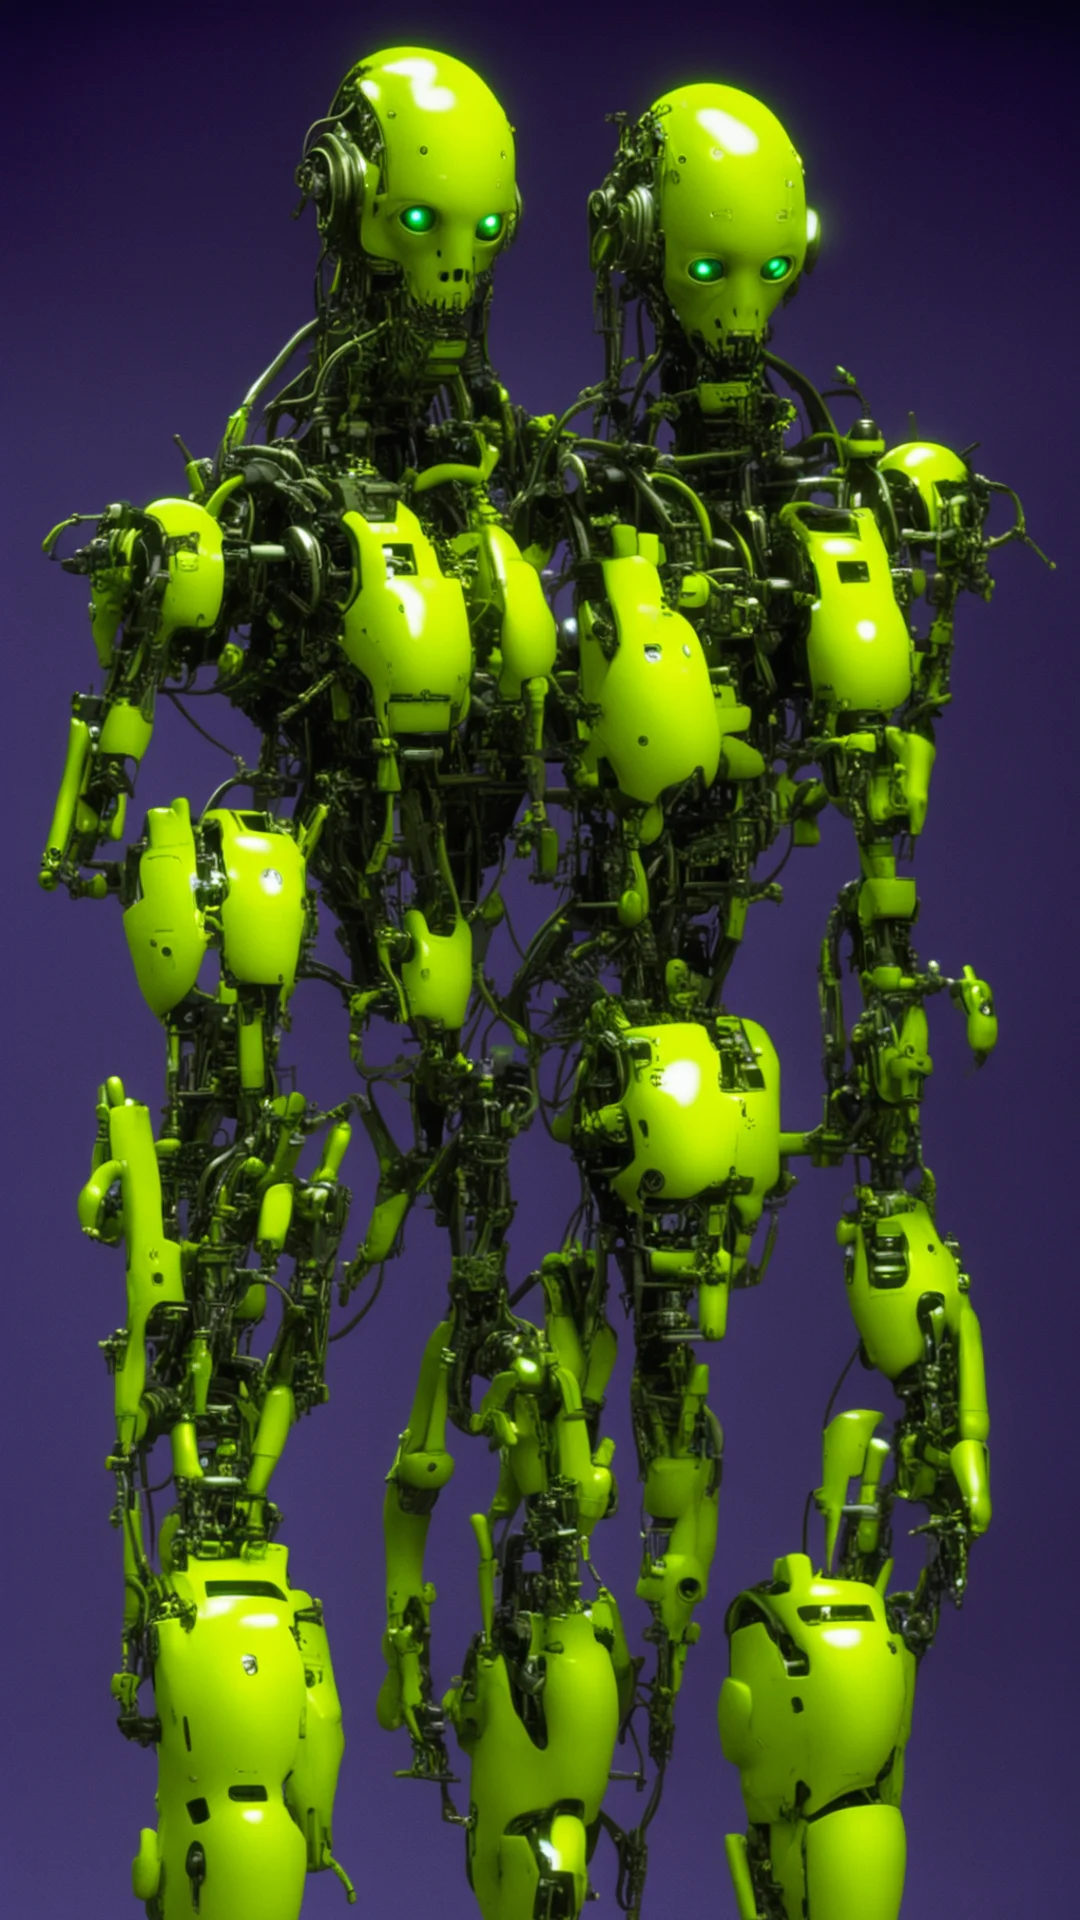 from movie event horizon 1997 from movie virus 1999 show glowing yellow green eyed multiple handed humanoid monster robots made of machine parts and flesh render tall